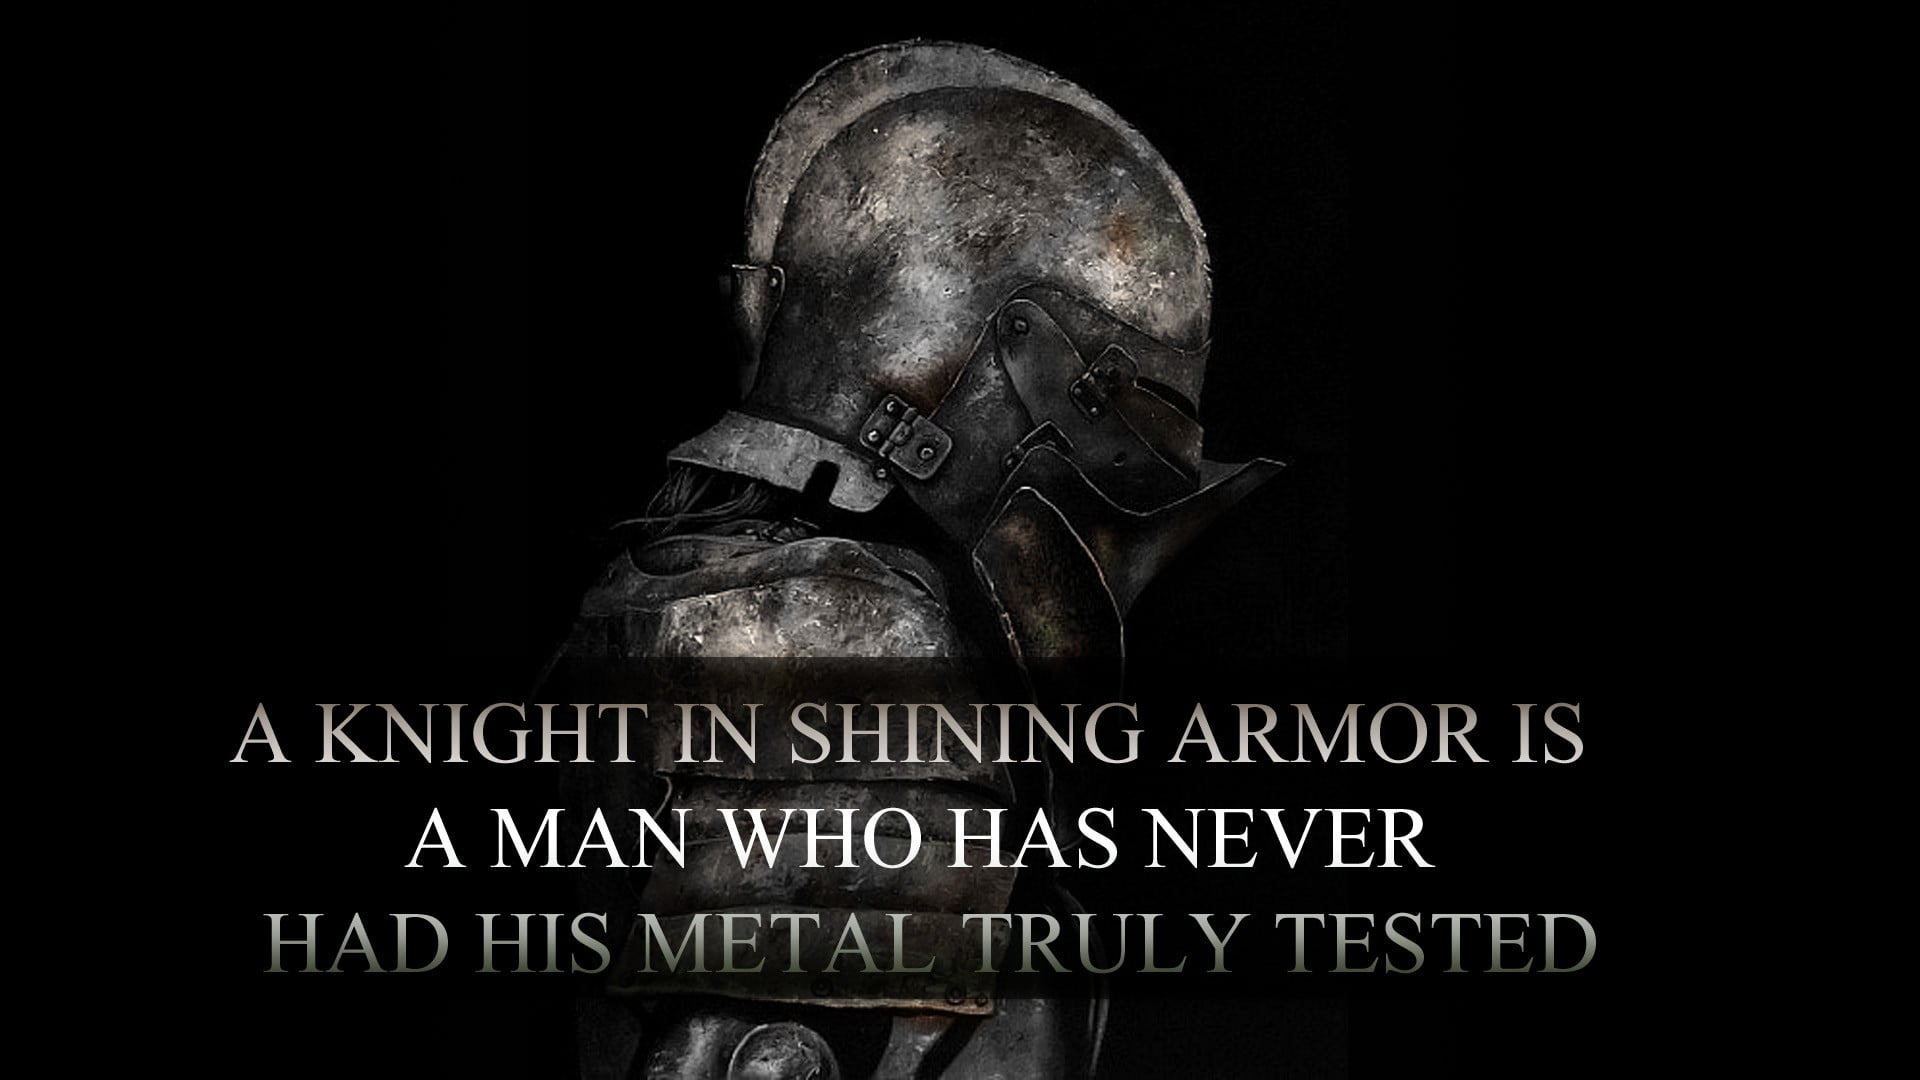 a knight in shining armor is a man who has never had his metal truly tested text